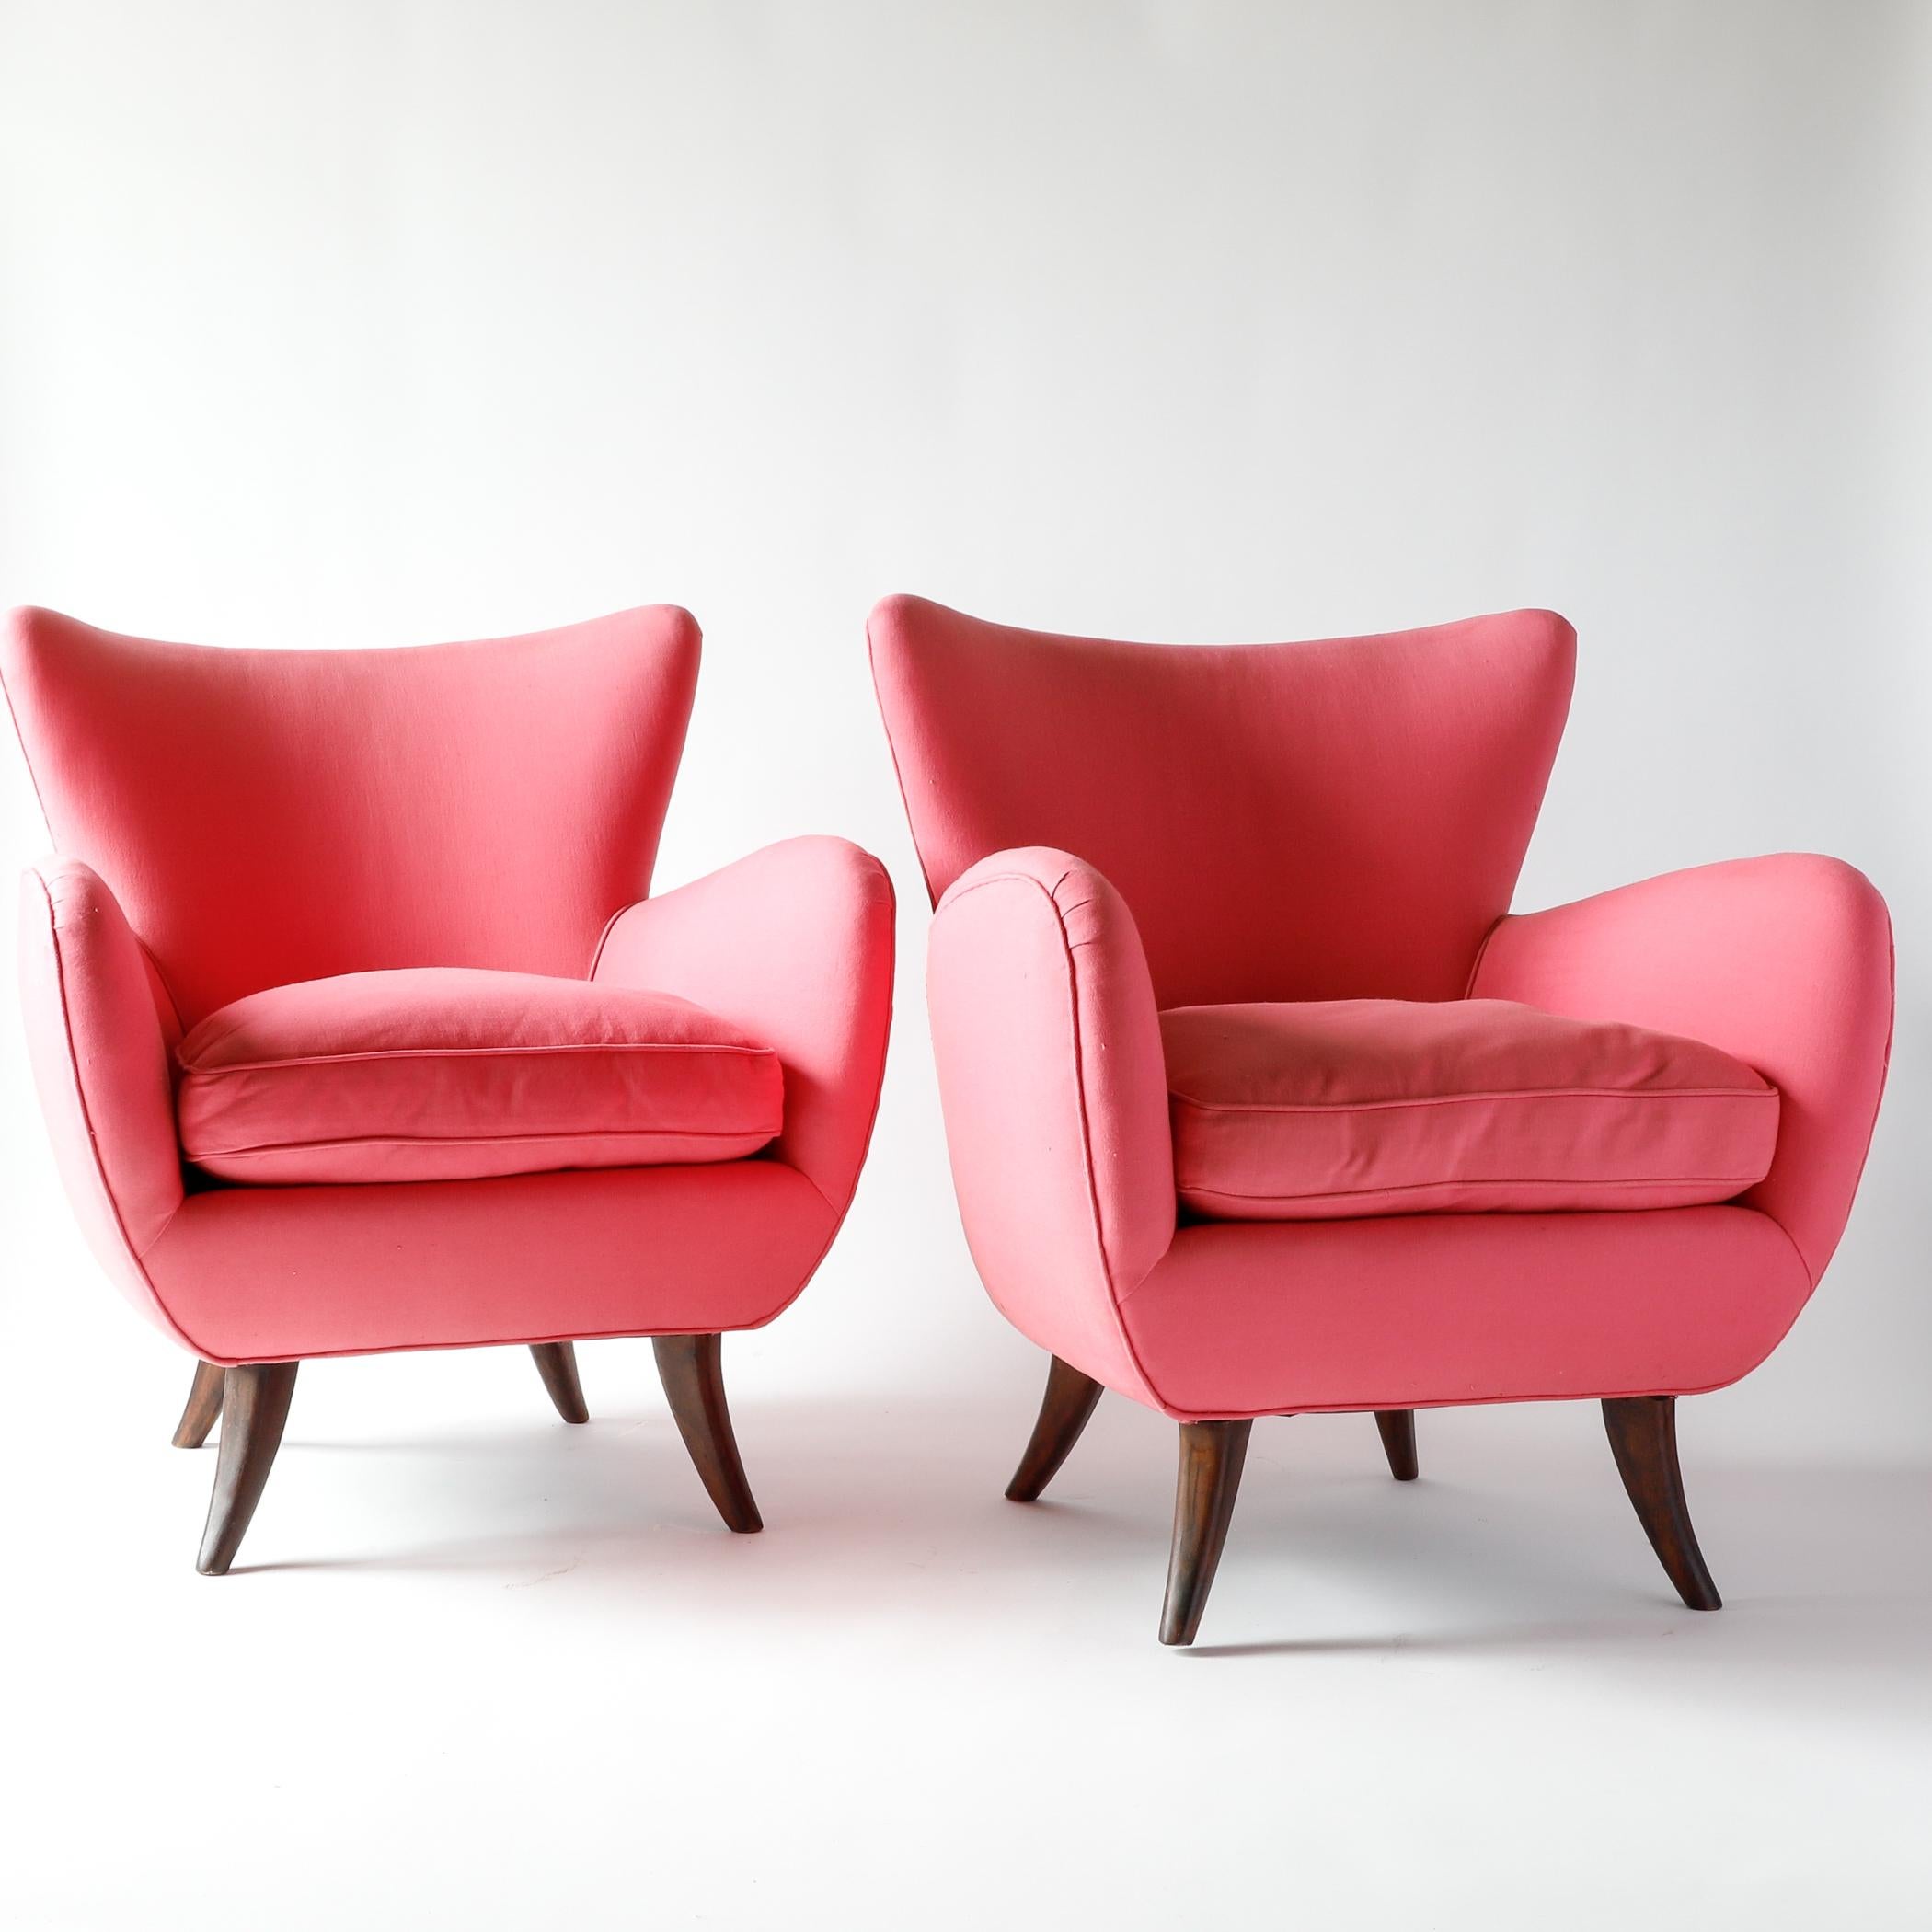 Pair of upholstered lounge chairs by Austrian-American designer Ernst Schwadron. Having emigrated to the United States in the late 1930s, Schwadron became the chief designer for New York retailer Rena Rosenthal and an early designer for Knoll in the